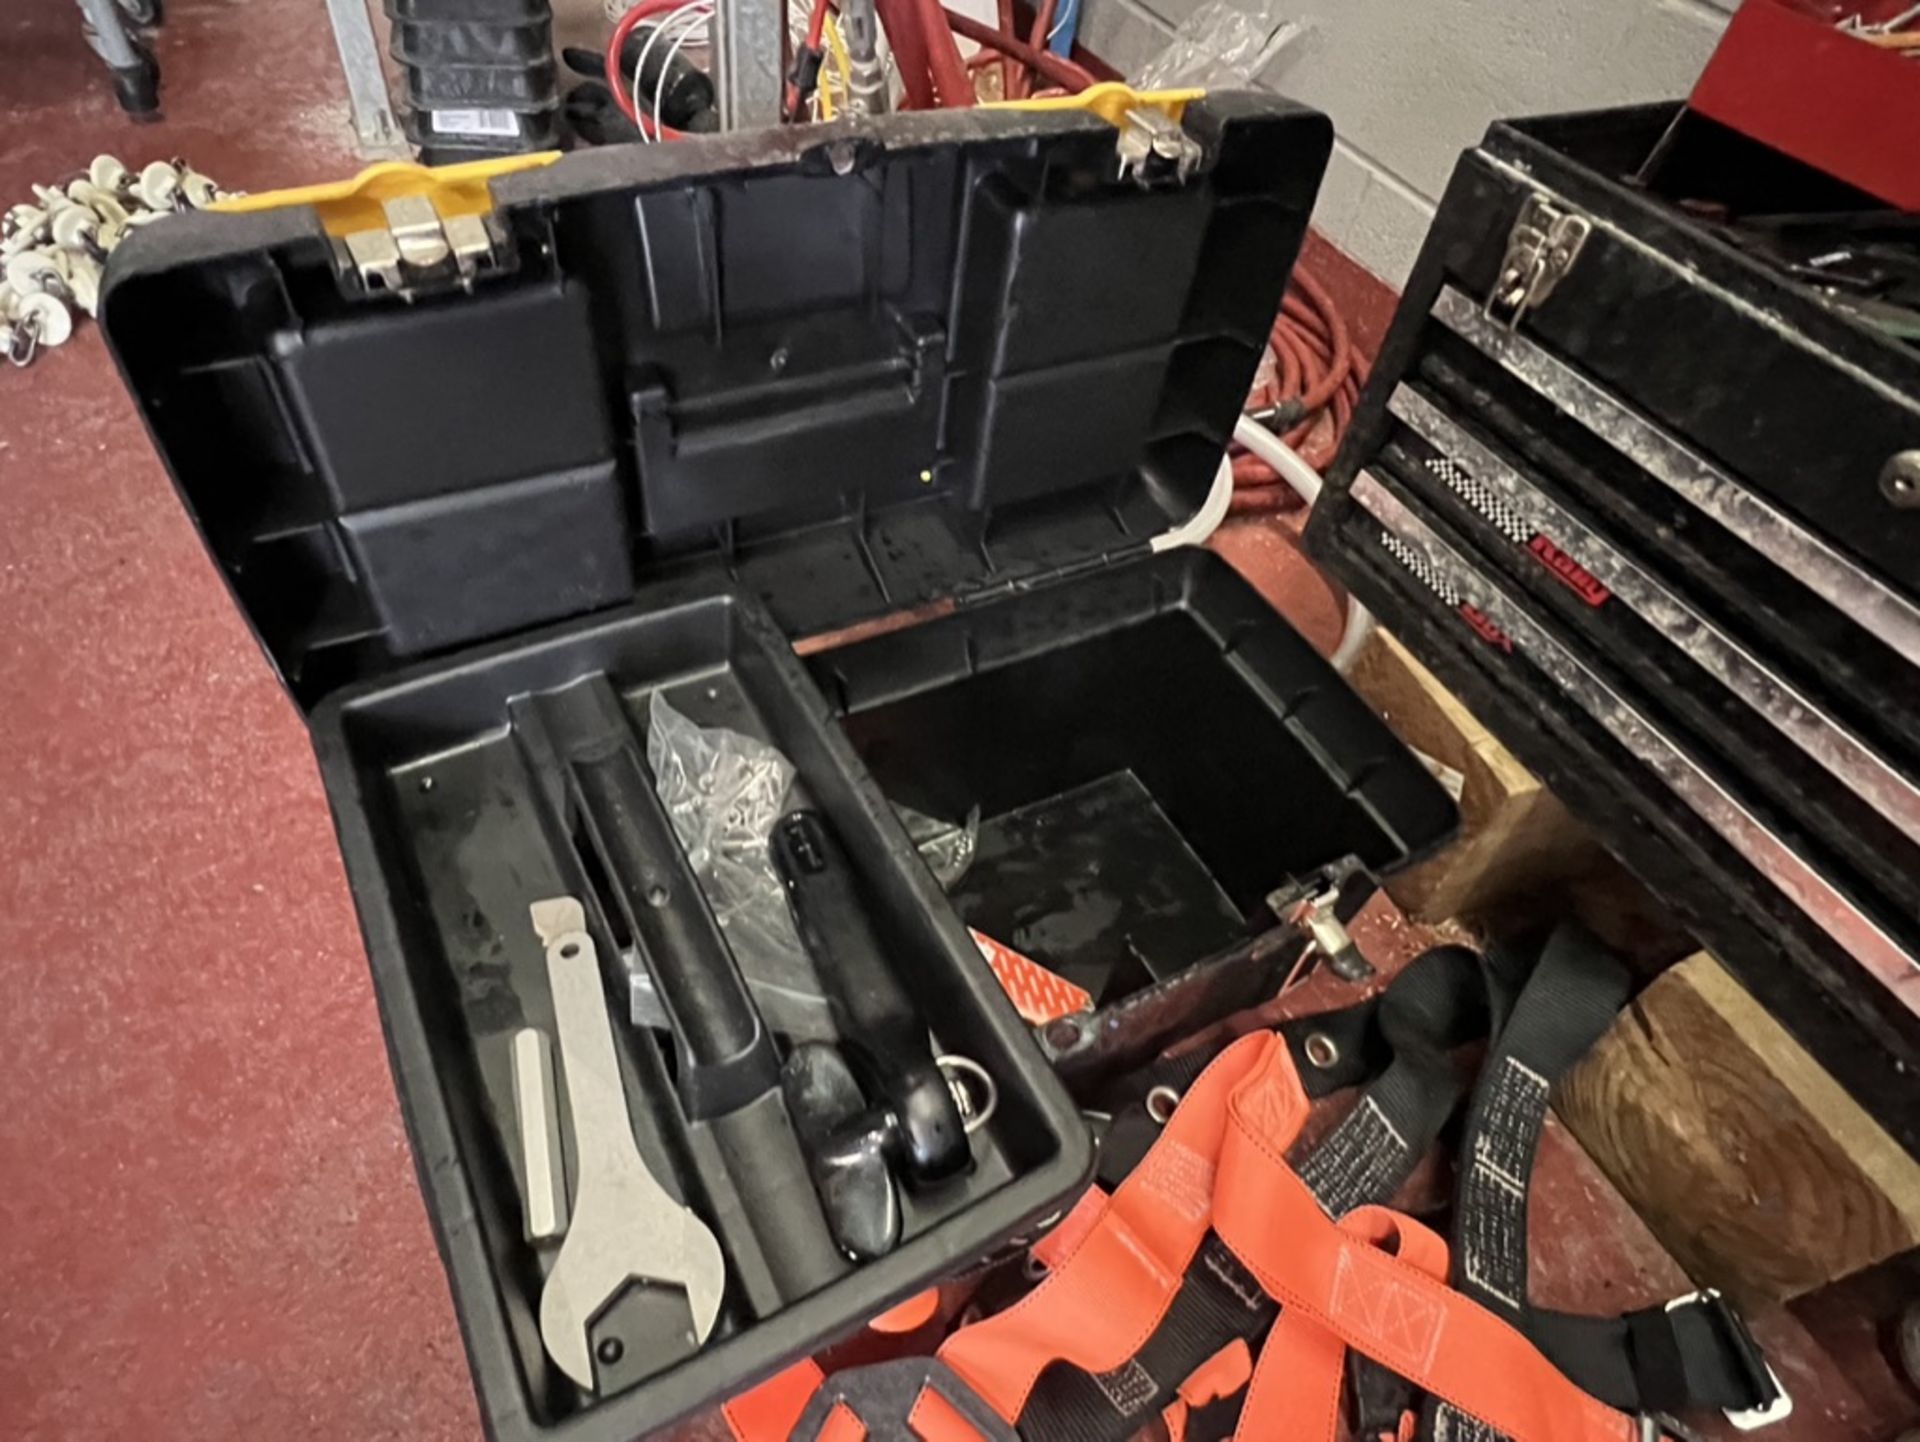 LOT OF: (2) PLASTIC TOOL BOXES, (1) METAL CRAFTSMAN TOOL BOX AND PICTURED SMALL TOOLS, DRILL BITS, - Image 2 of 15